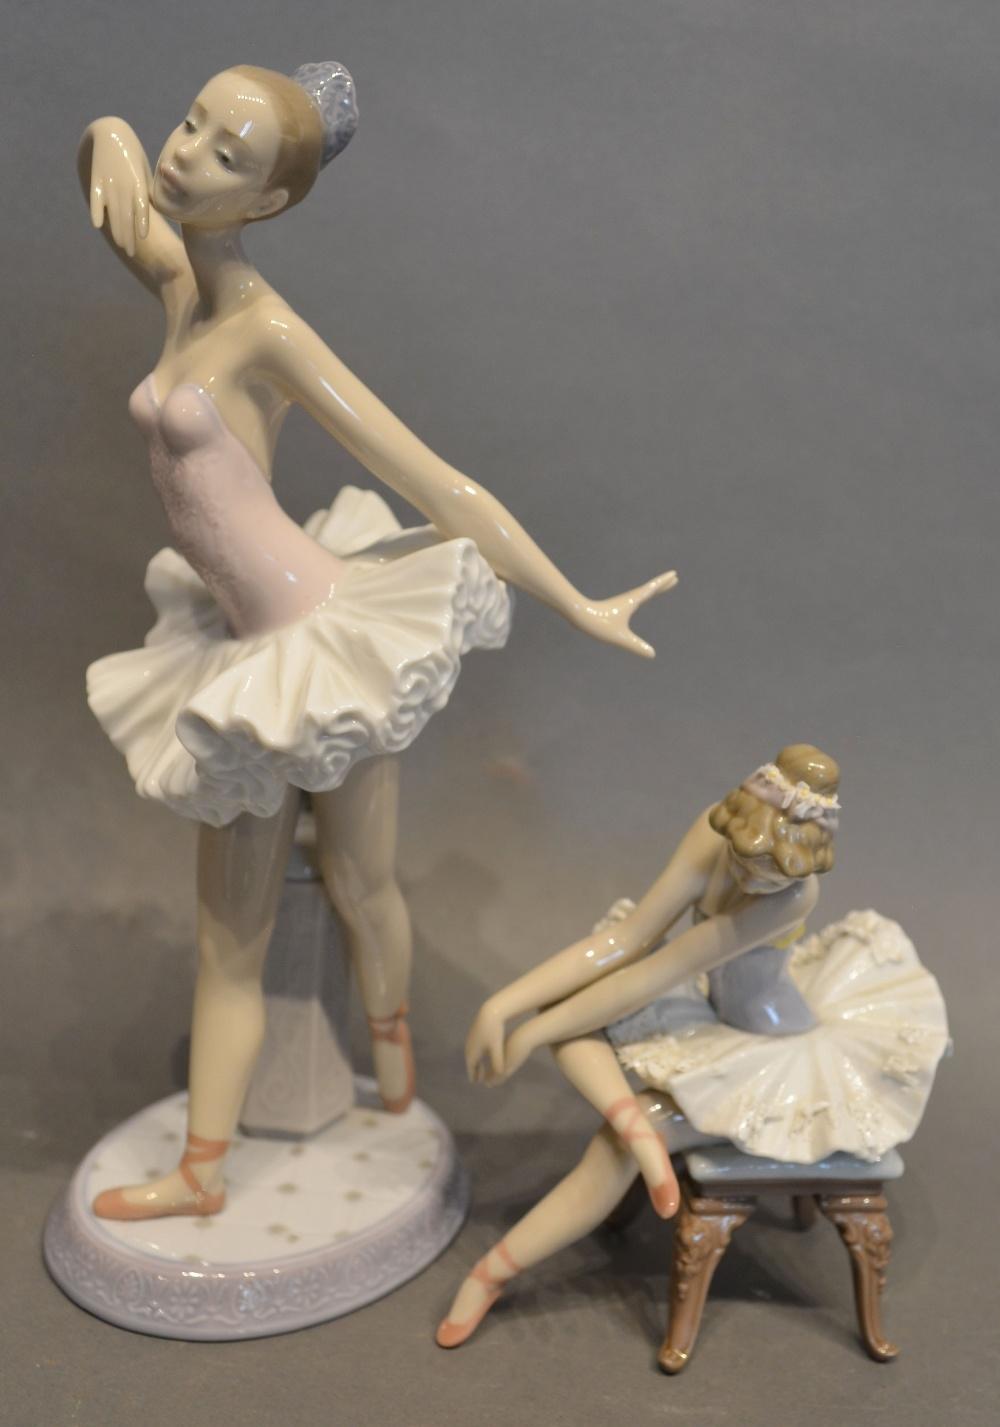 A Lladro Porcelain Model of a Ballerina, together with another similar, seated